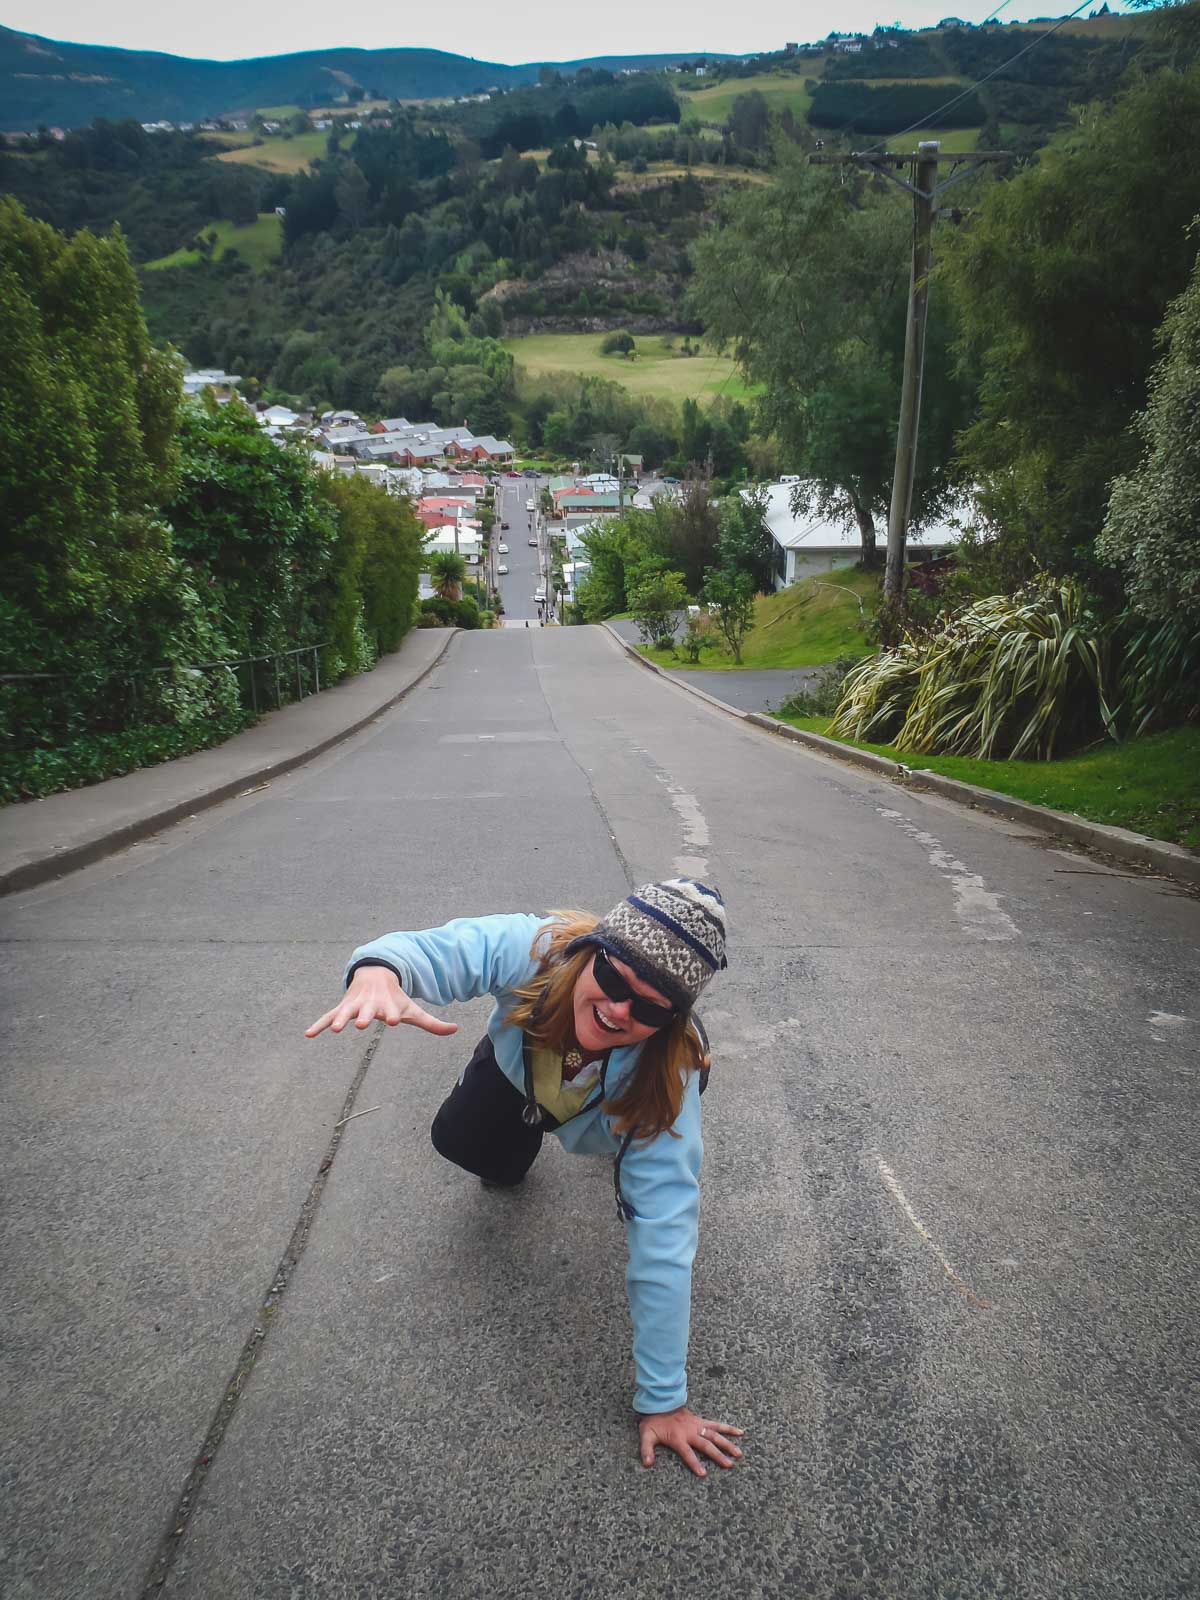 things to do in new zealand world's steepest street